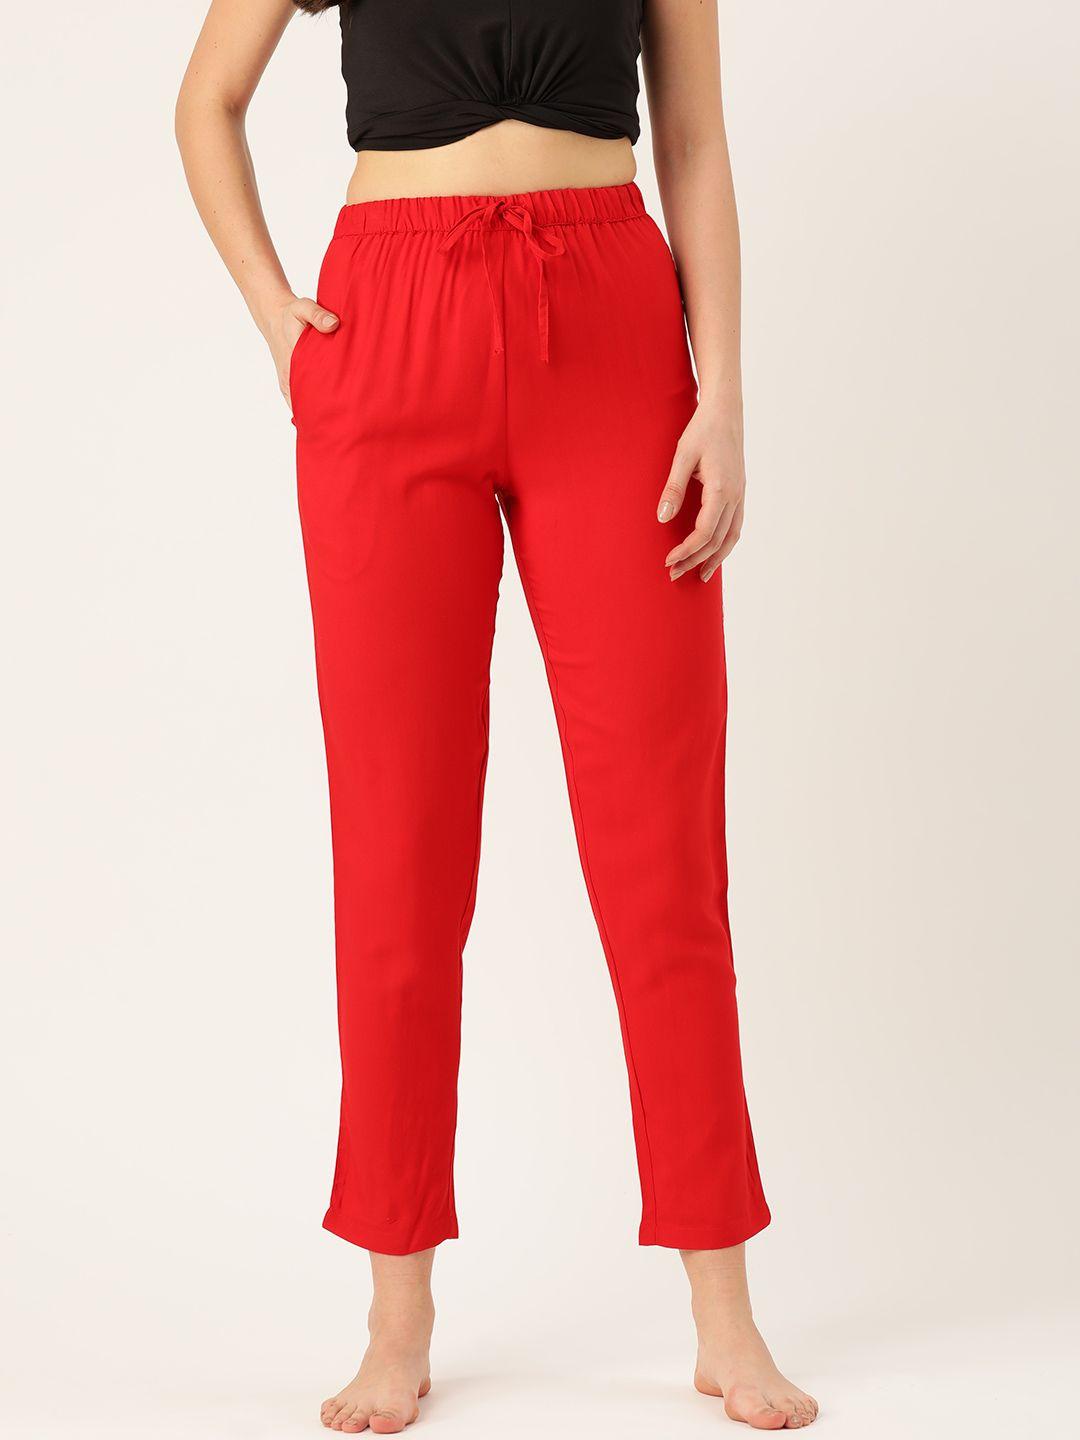 etc-women-red-solid-lounge-pants